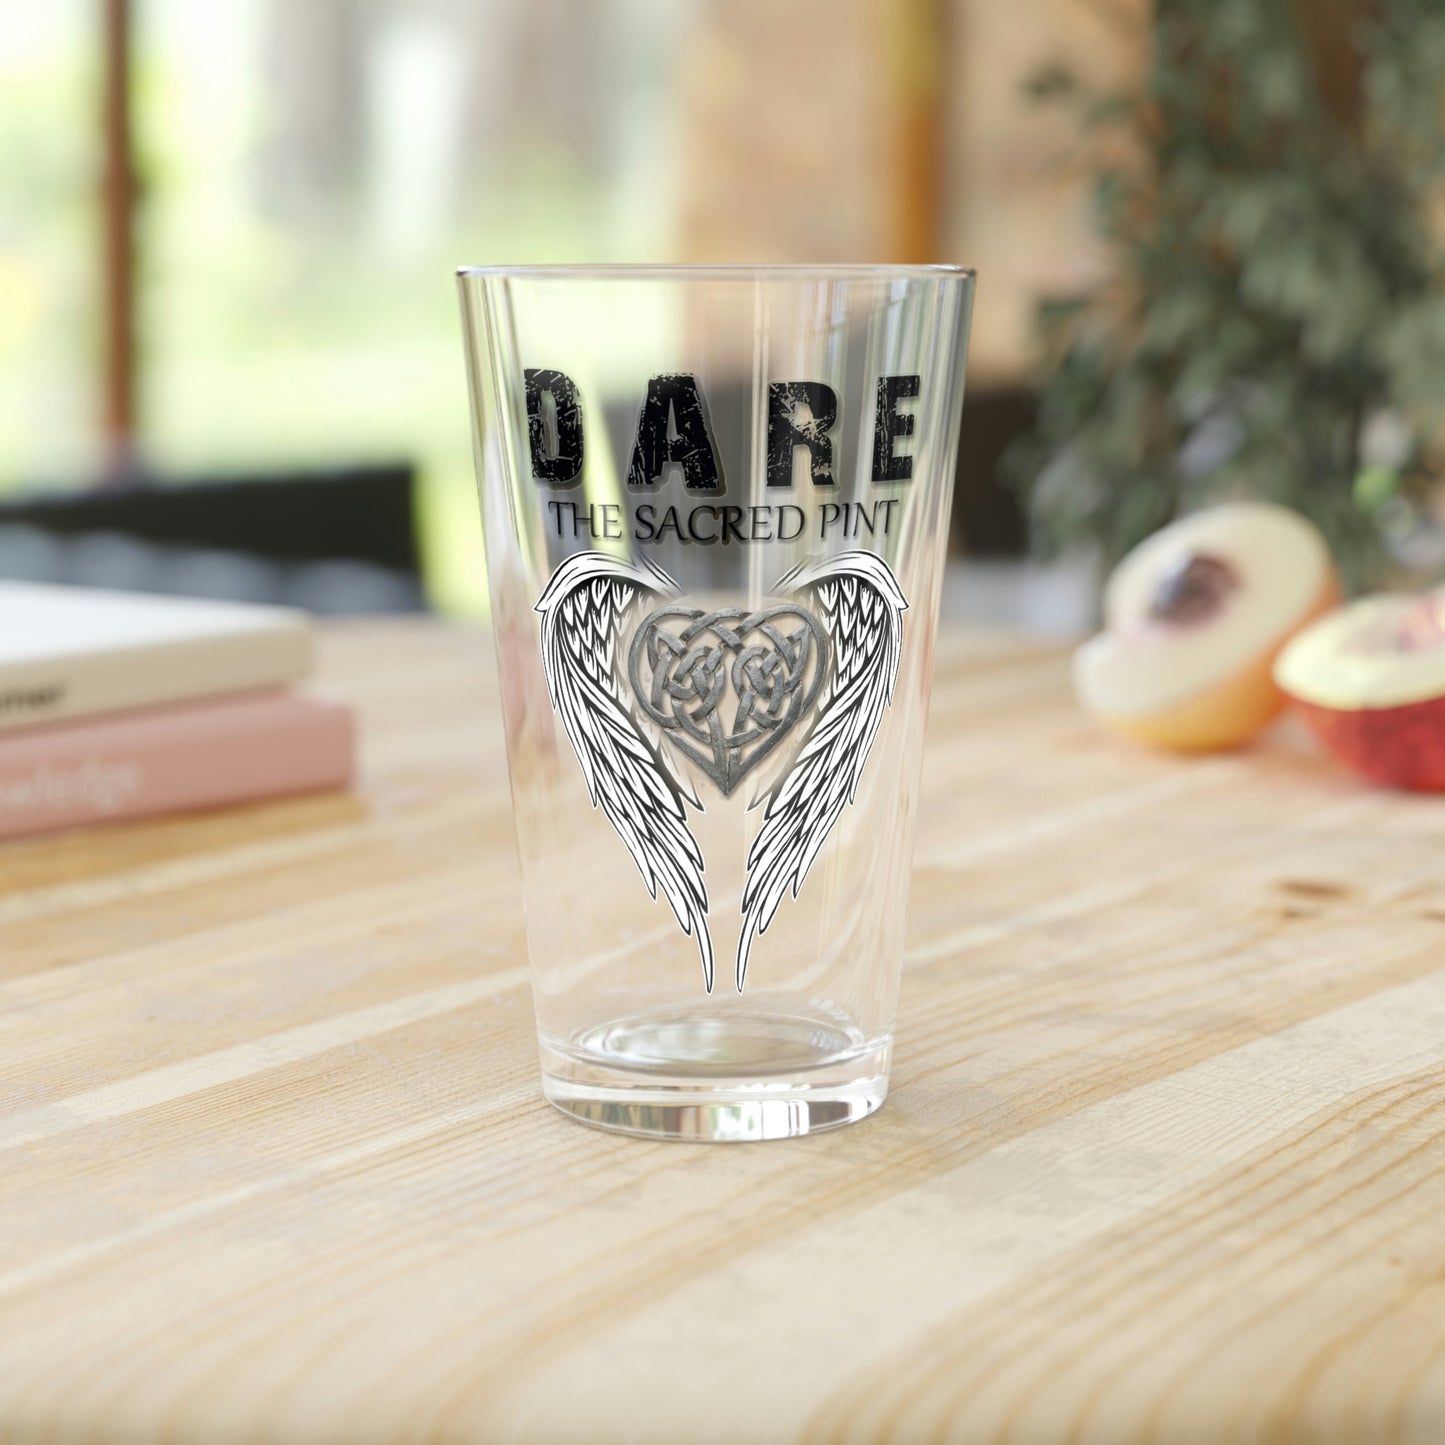 The DARE SACRED Pint